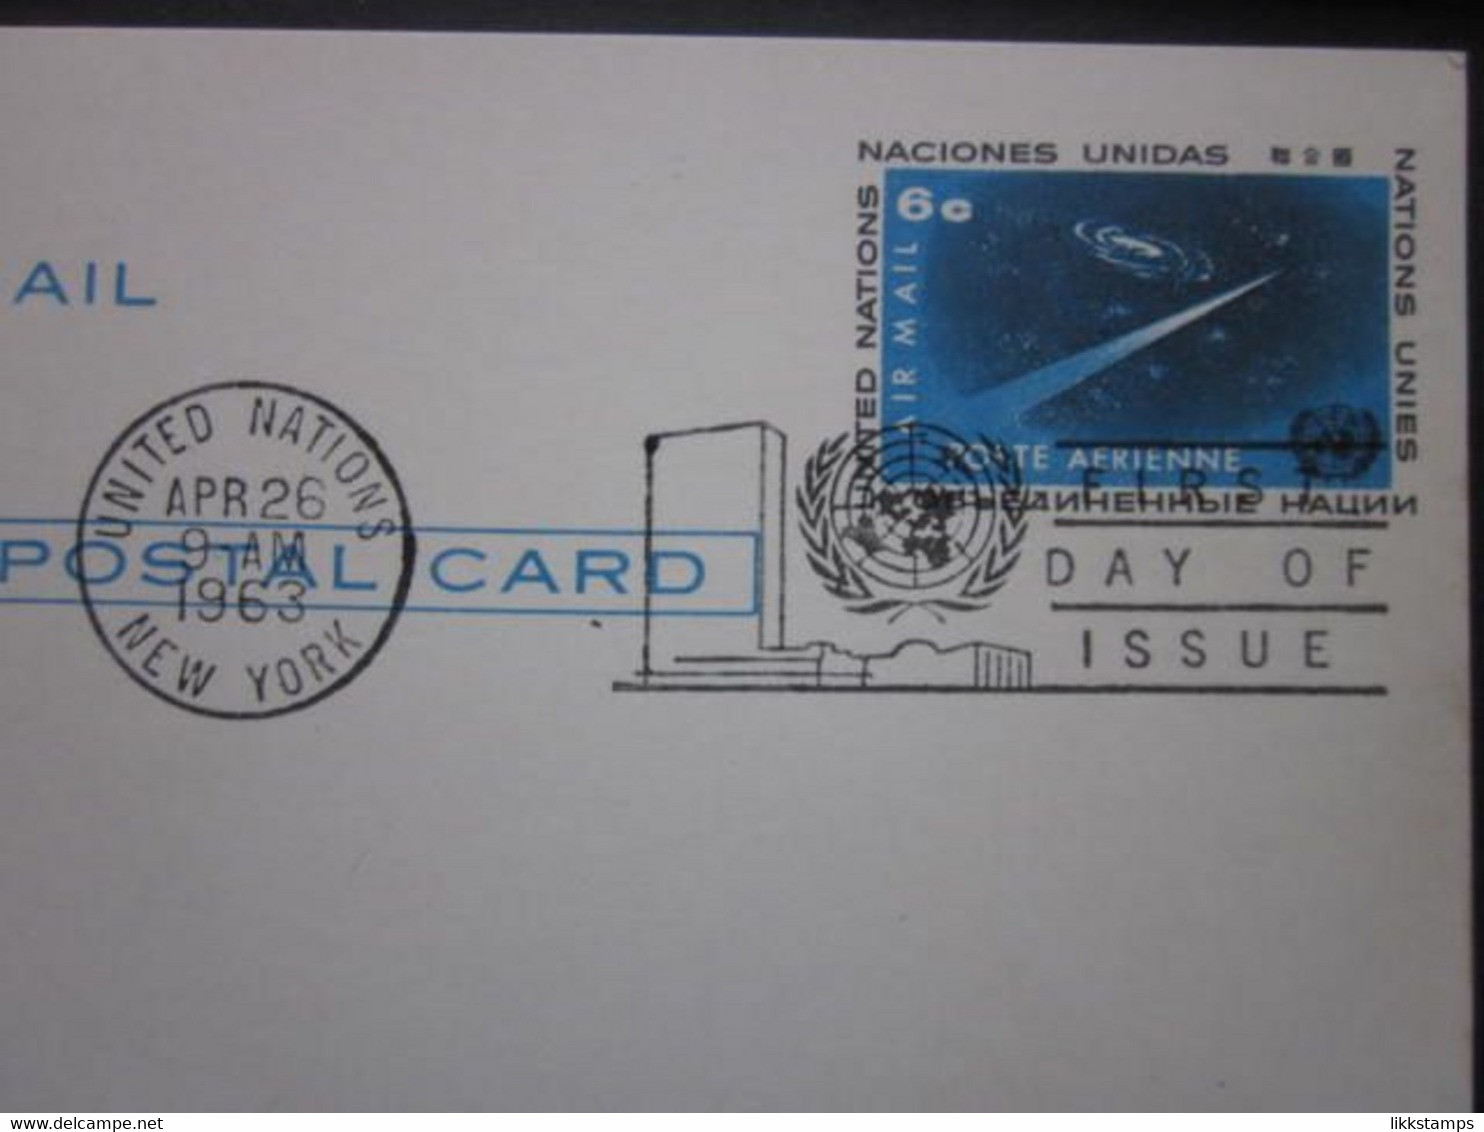 A1960's GROUP OF SEVEN UNITED NATIONS POSTAL CARDS WITH FIRST DAY OF ISSUE POSTMARKS. ( 02228 )